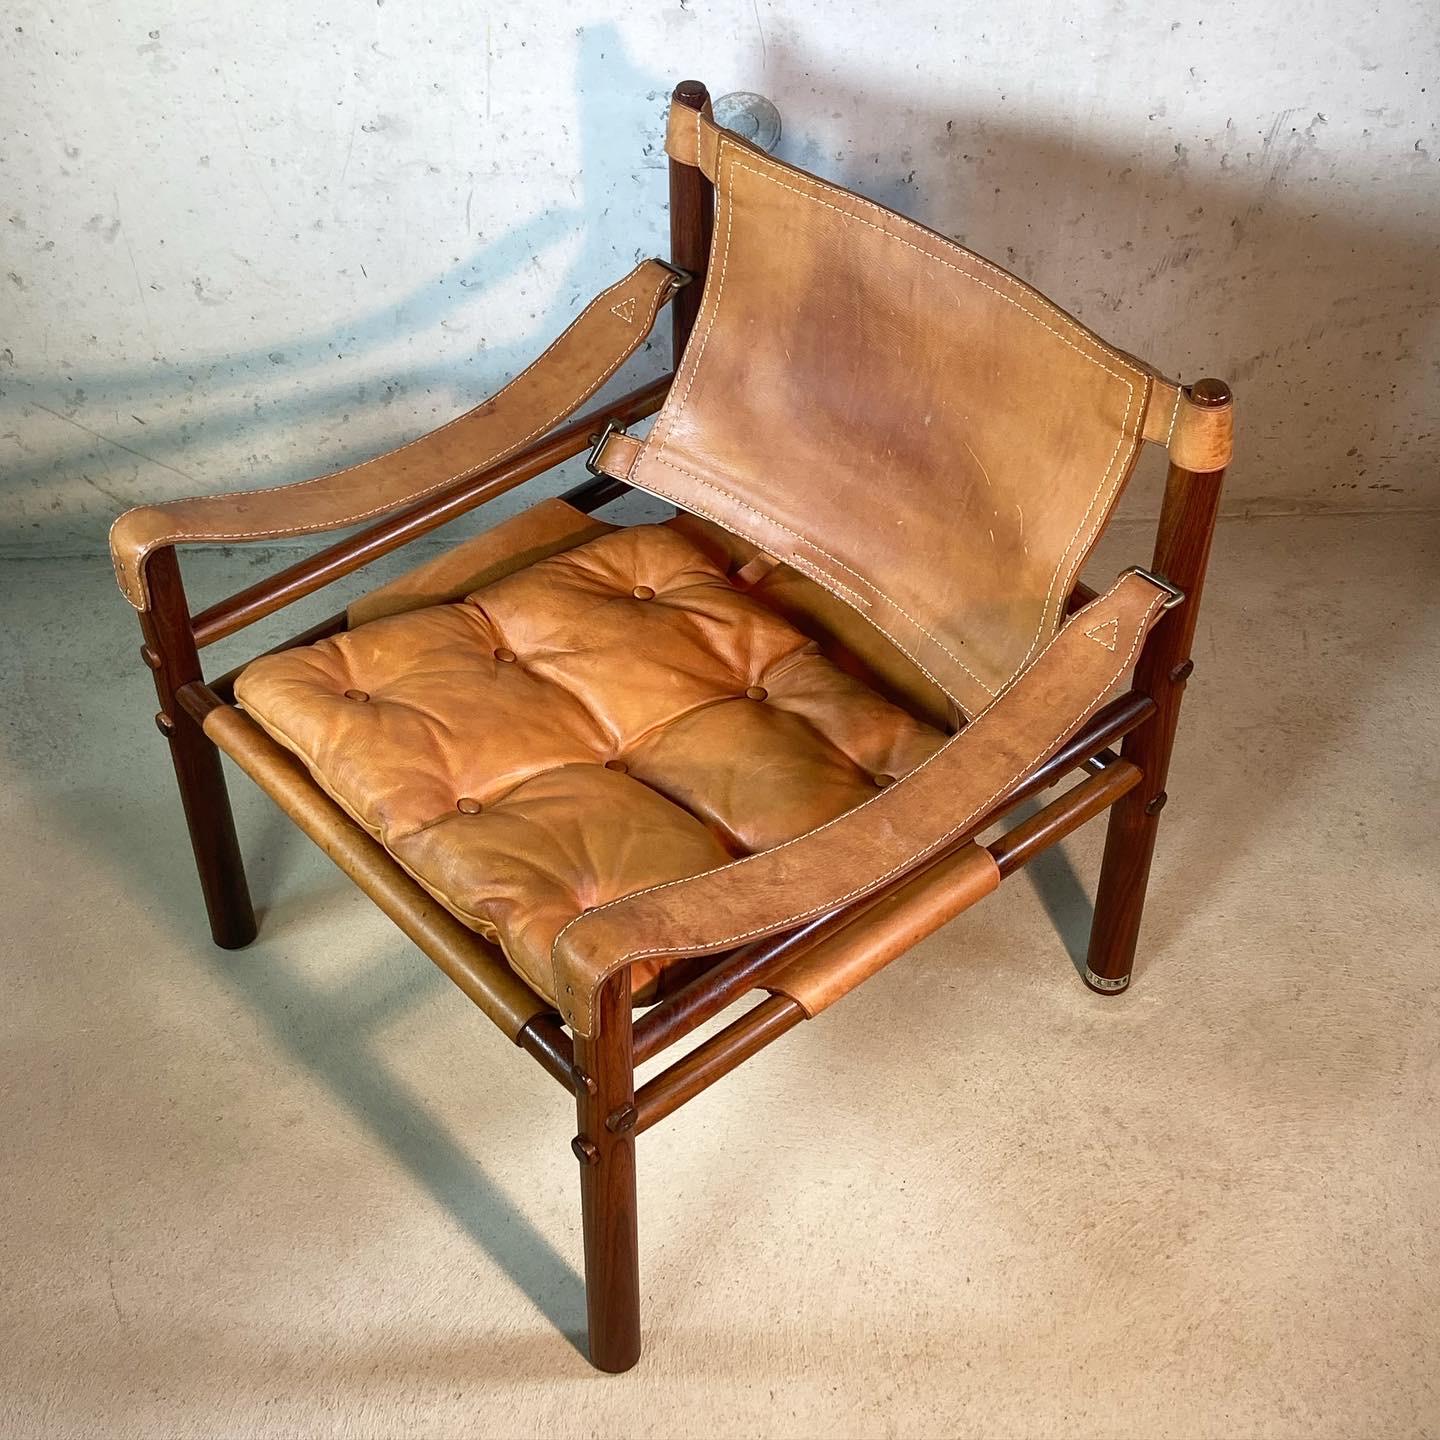 A 'Sirocco' safari chair designed by Arne Norell in 1966 and produced by Norell in Sweden in the 1970s. This beautifully patinated piece features a solid rosewood frame strapped together by leather slings with brass fittings and a removable tufted